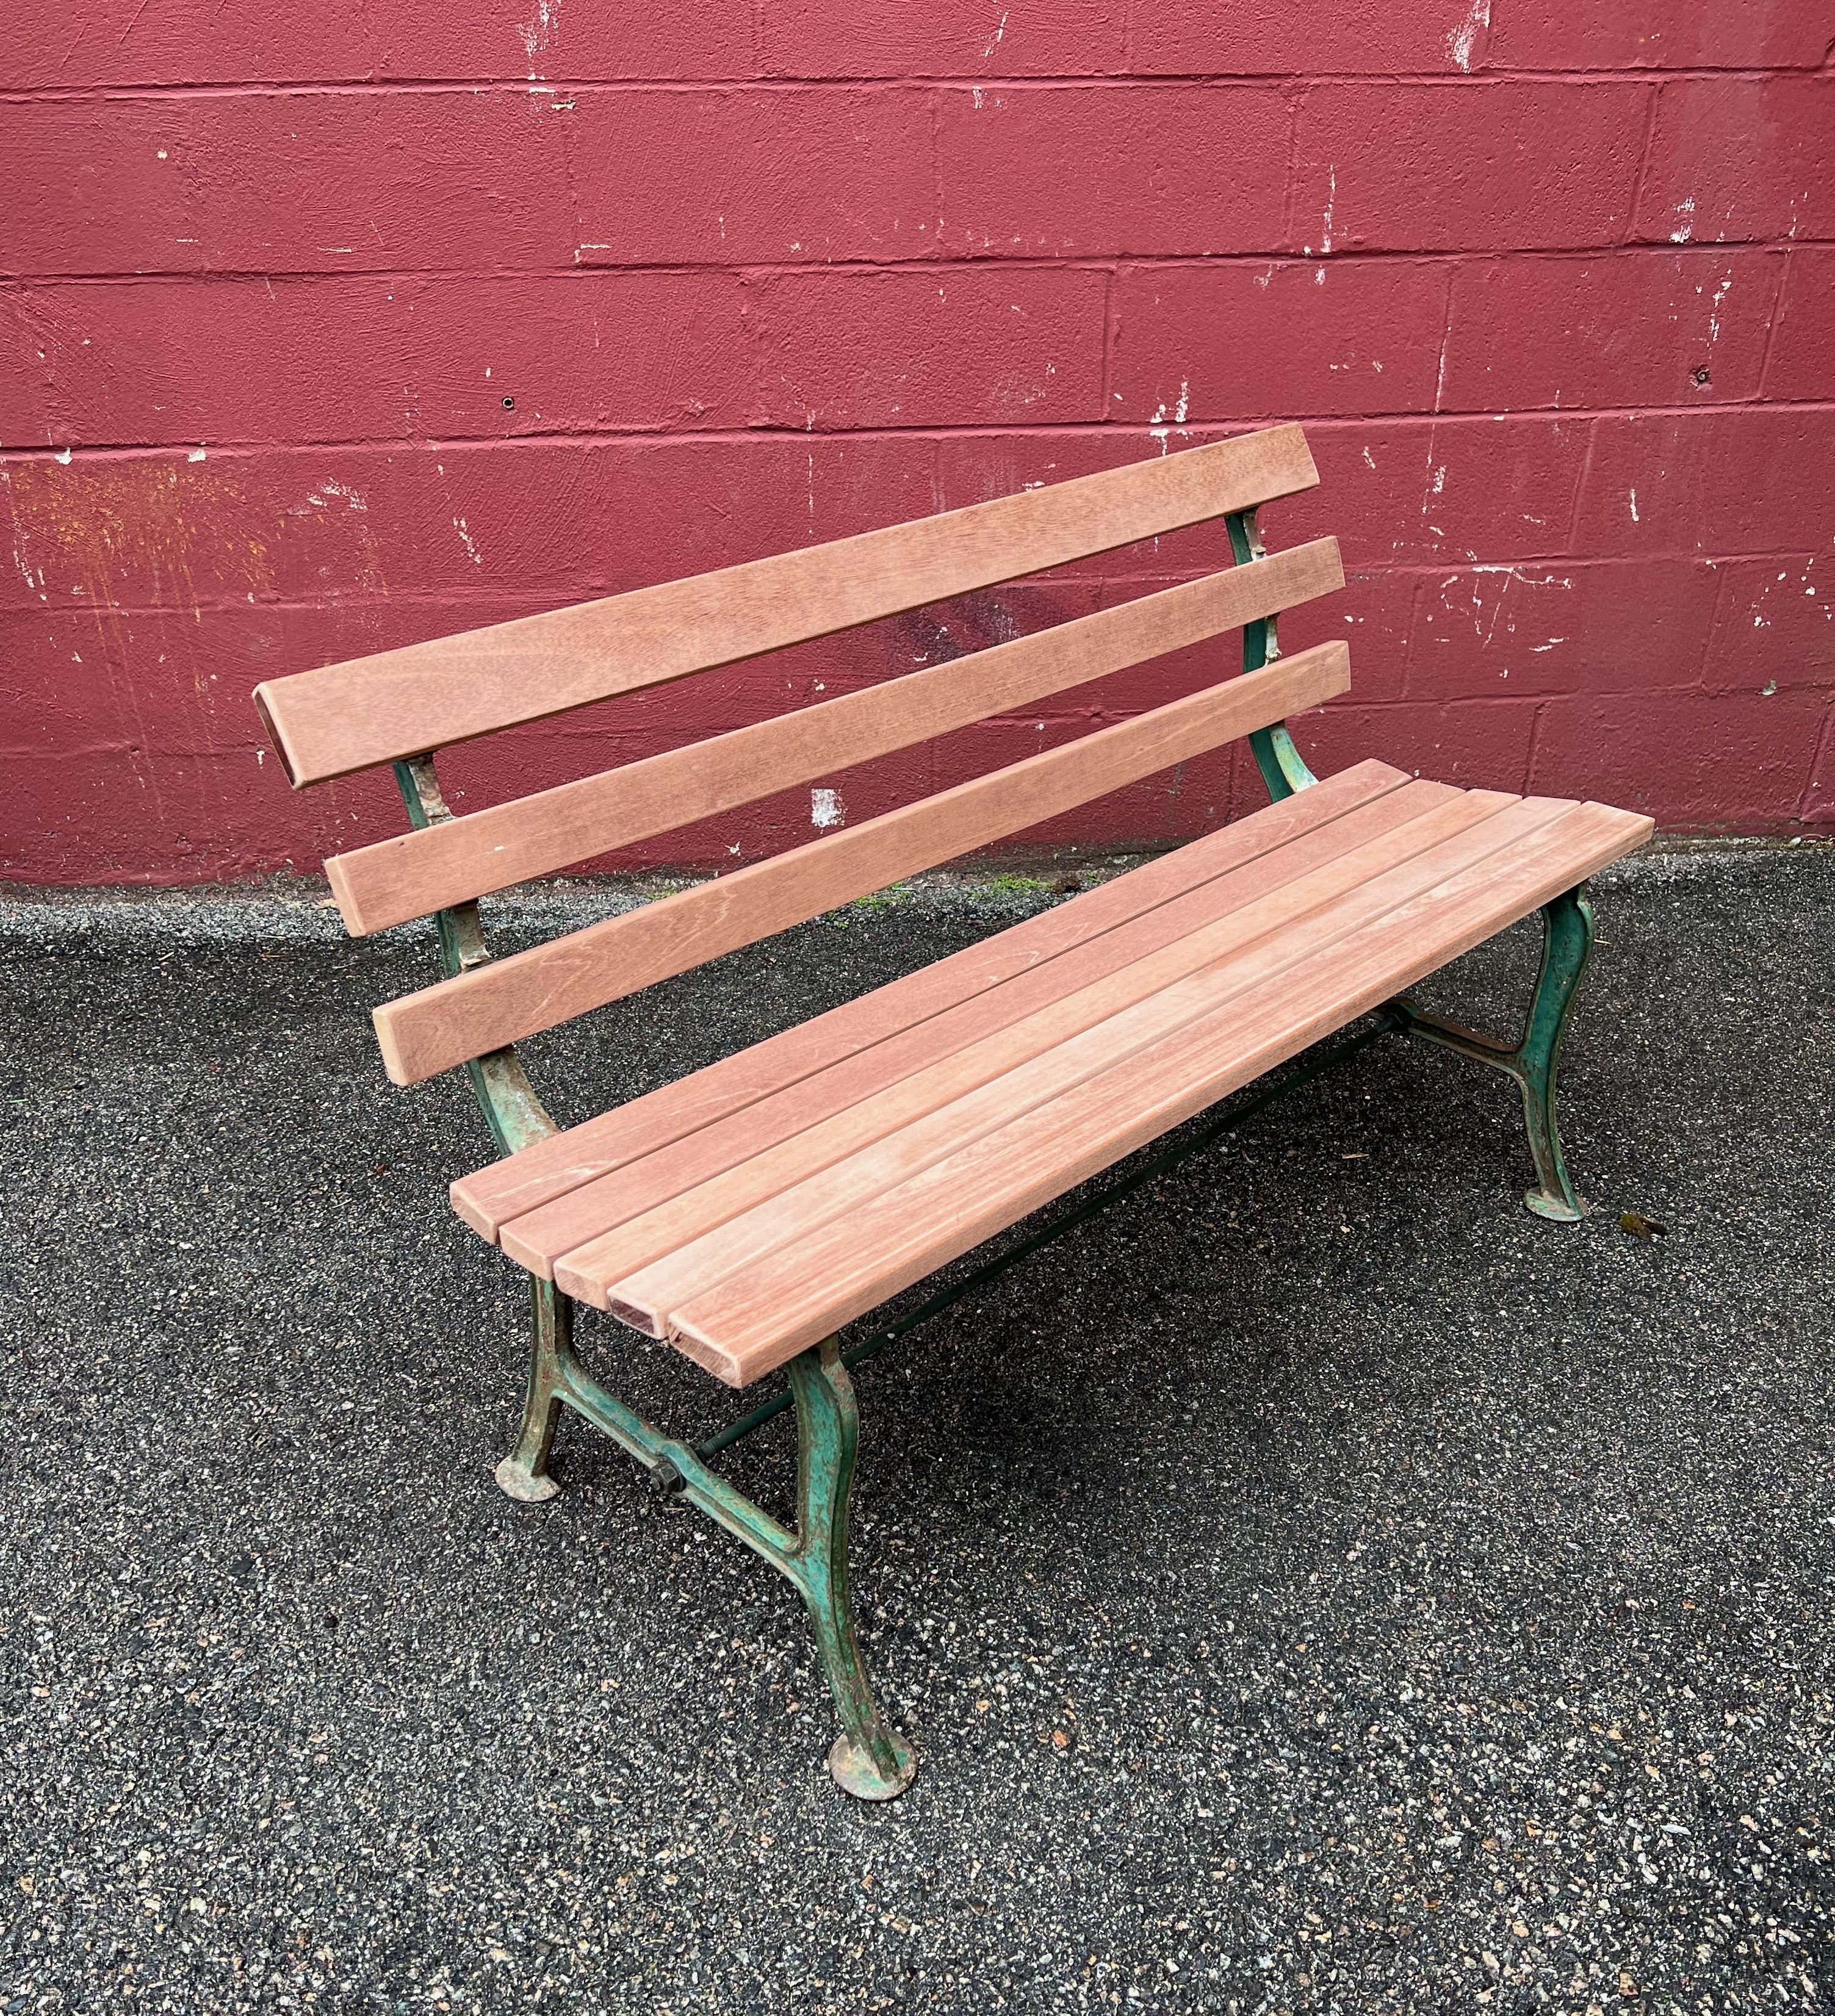 This late 19th or early 20th century park bench is a beautiful and historic piece of outdoor furniture. The cast iron base, with its original paint, adds character and charm to the bench, while the recently replaced untreated mahogany slats ensure